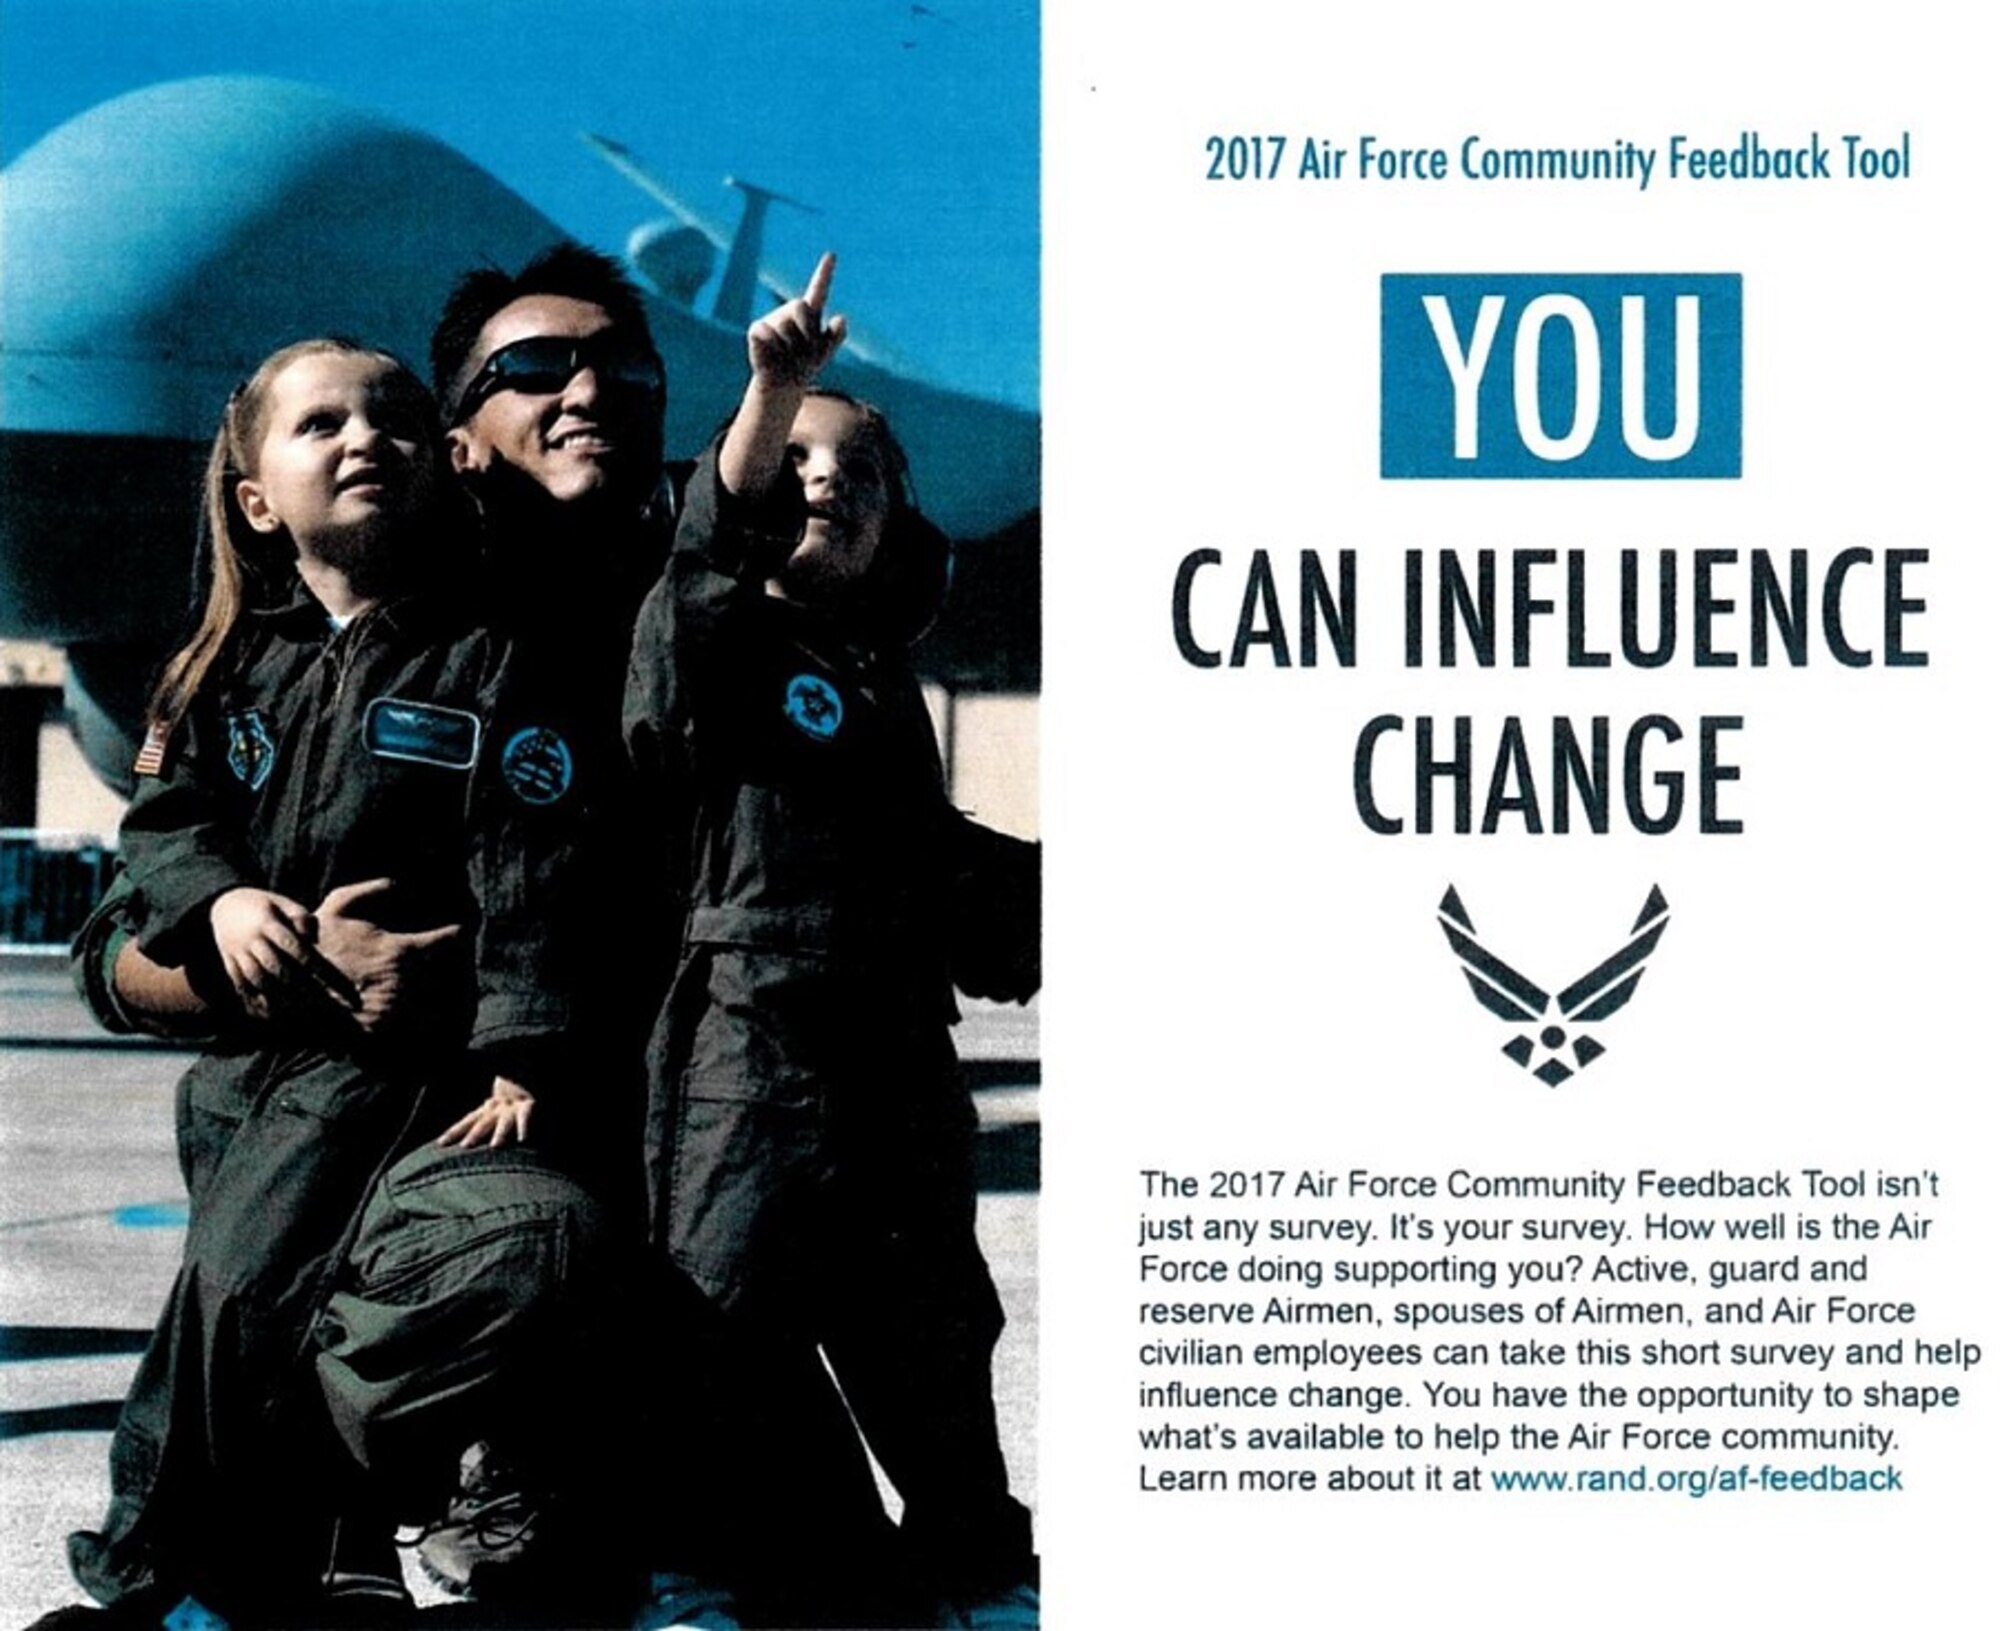 The 2017 Air Force Community Feedback Tool isn't just any survey. How well is the Air Force doing supporting you? Active, Air National Guard and Reserve Airmen, spouses of Airmen and Air Force civilian employees can take this survey and help inluence change.